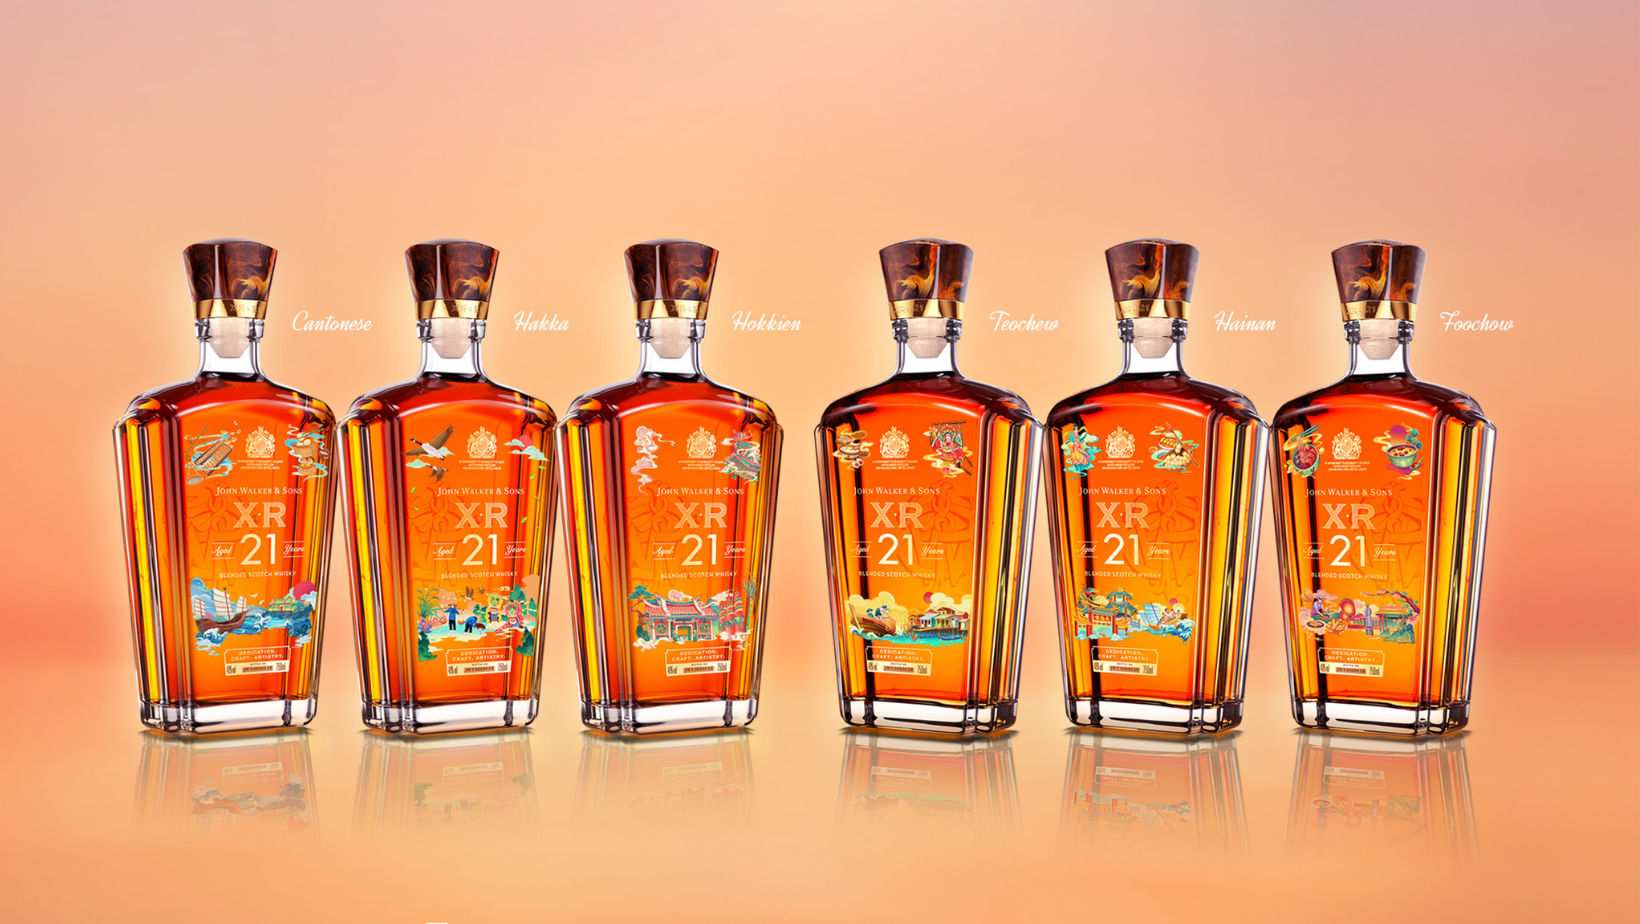 Monument Dor apotheek All about Diageo's John Walker & Sons XR21 Legacy Collection